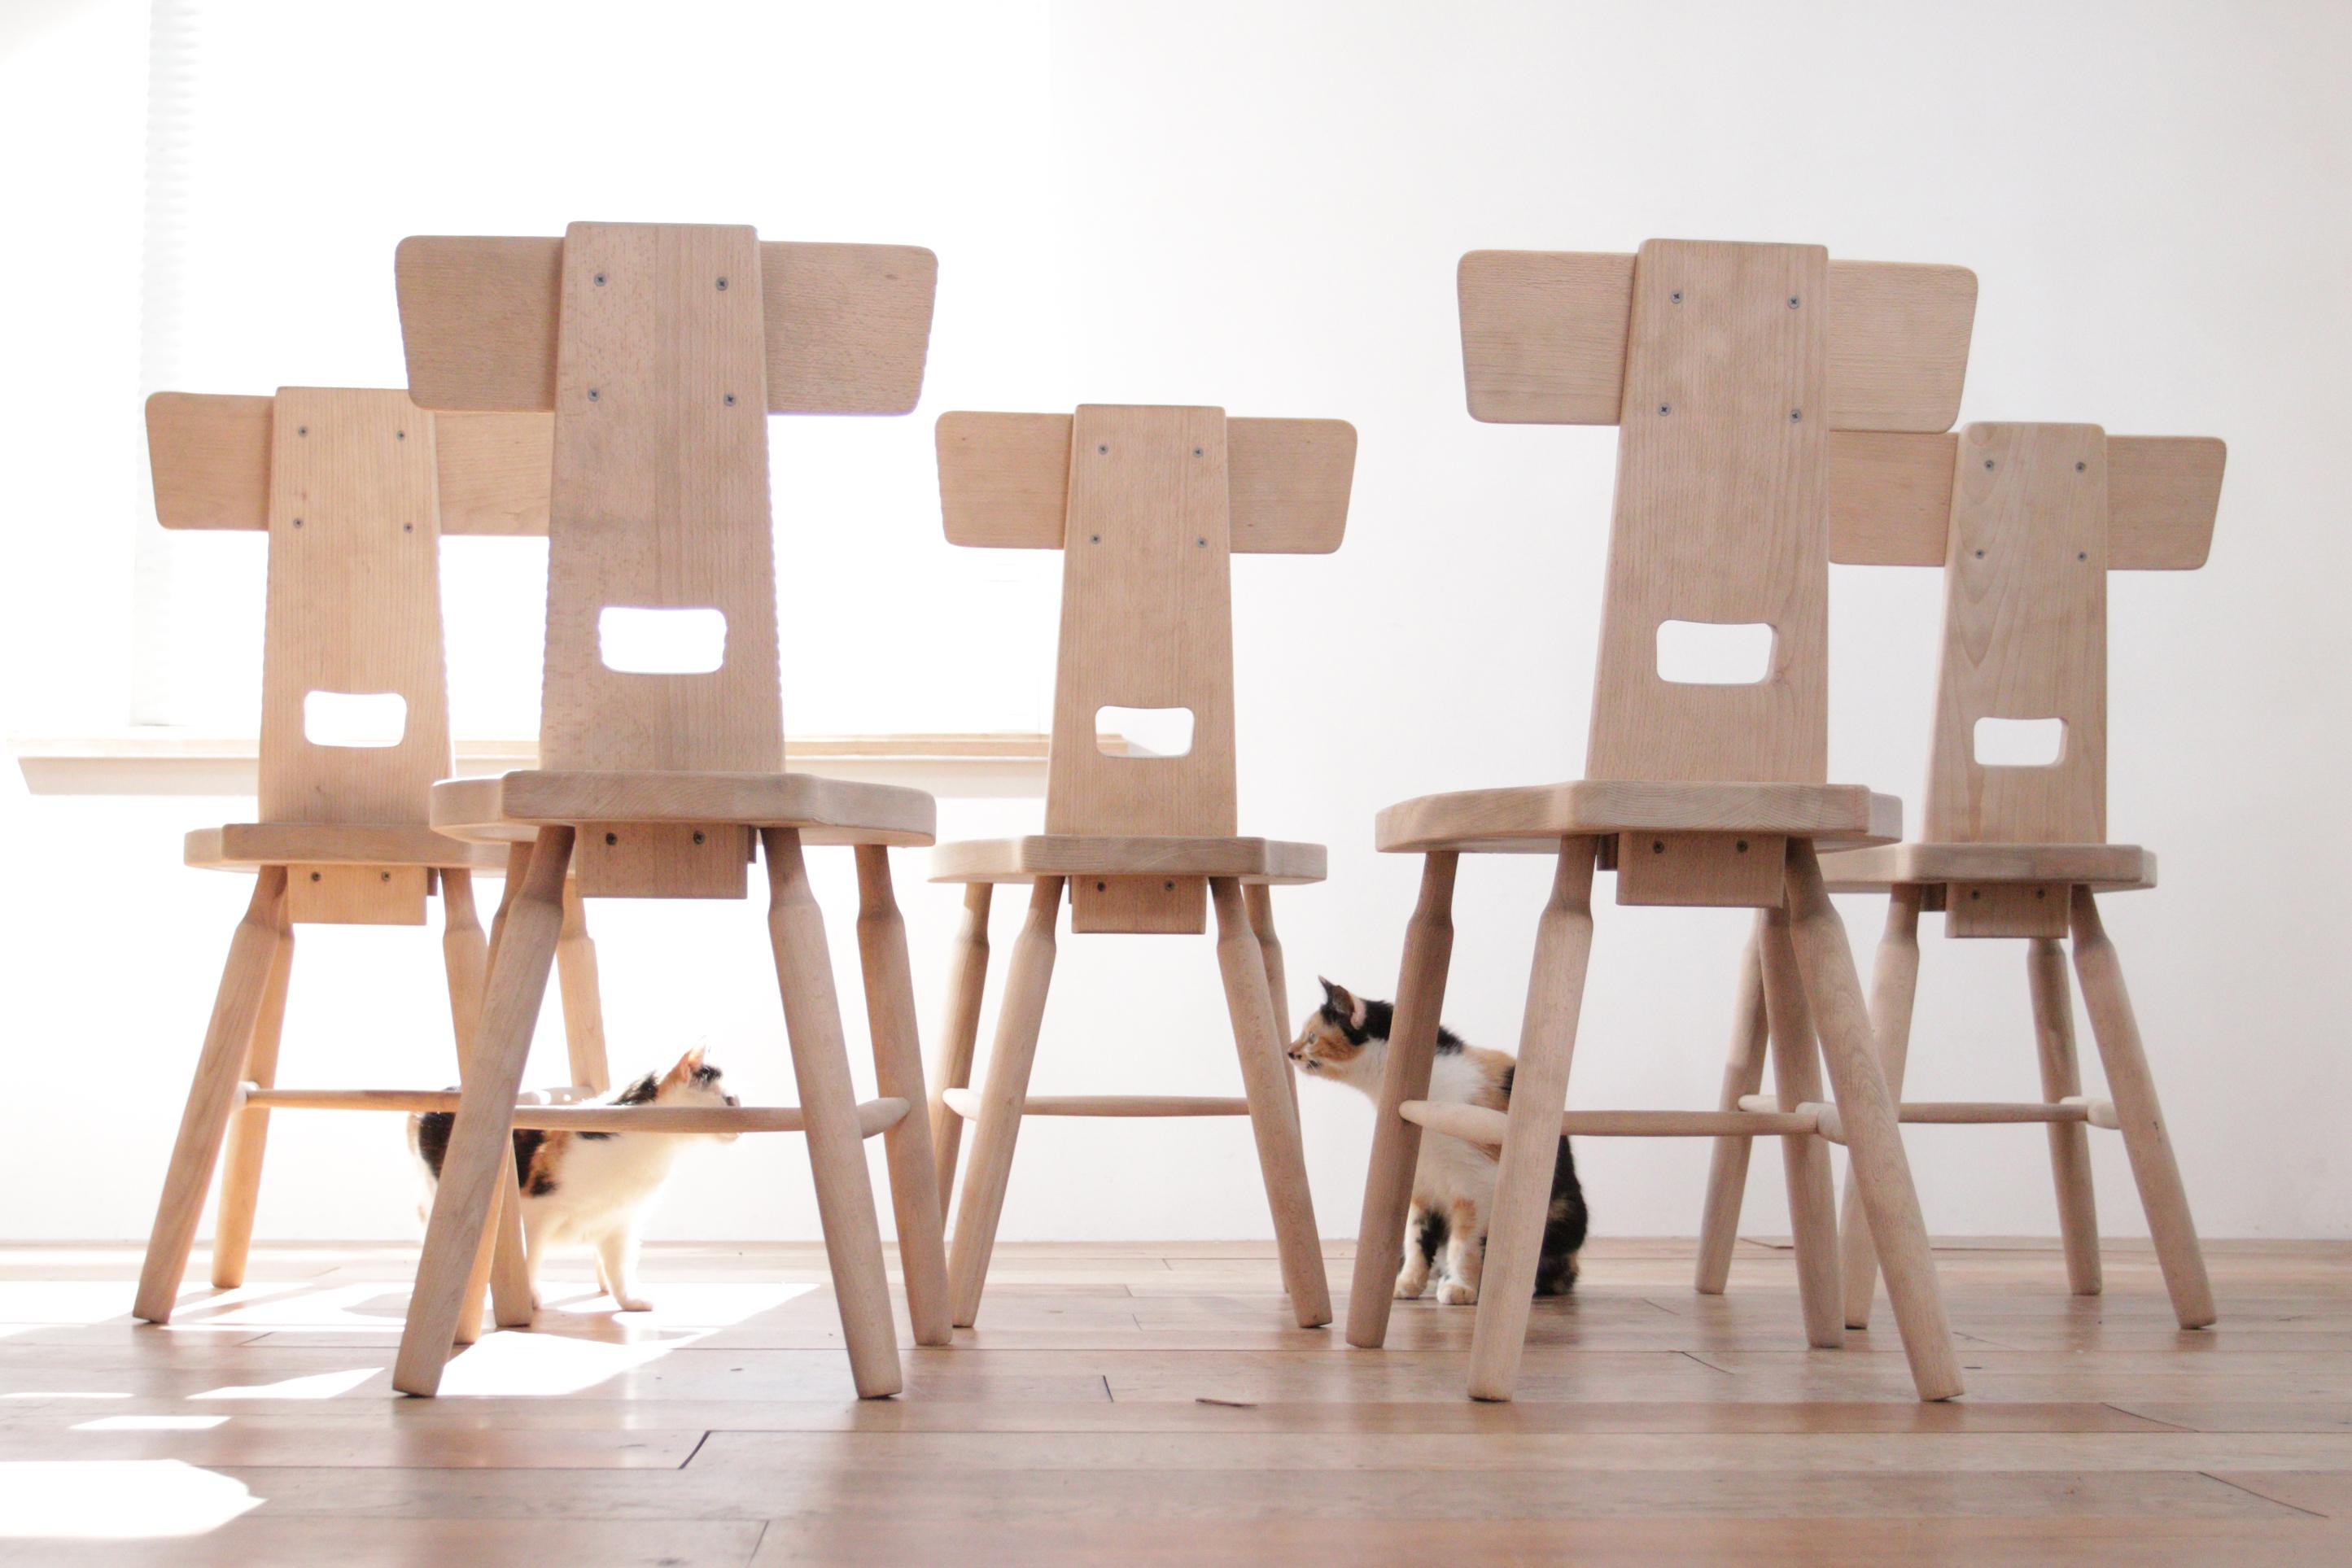 Beautiful Brutalist Beech chairs made in the Netherlands around the 1970s.
Probably inspired by the designs of Pierre Chapo.
We have sandblast the wood so you get the pure natural wood.
They are comfortable and very sturdy

Fits perfect with